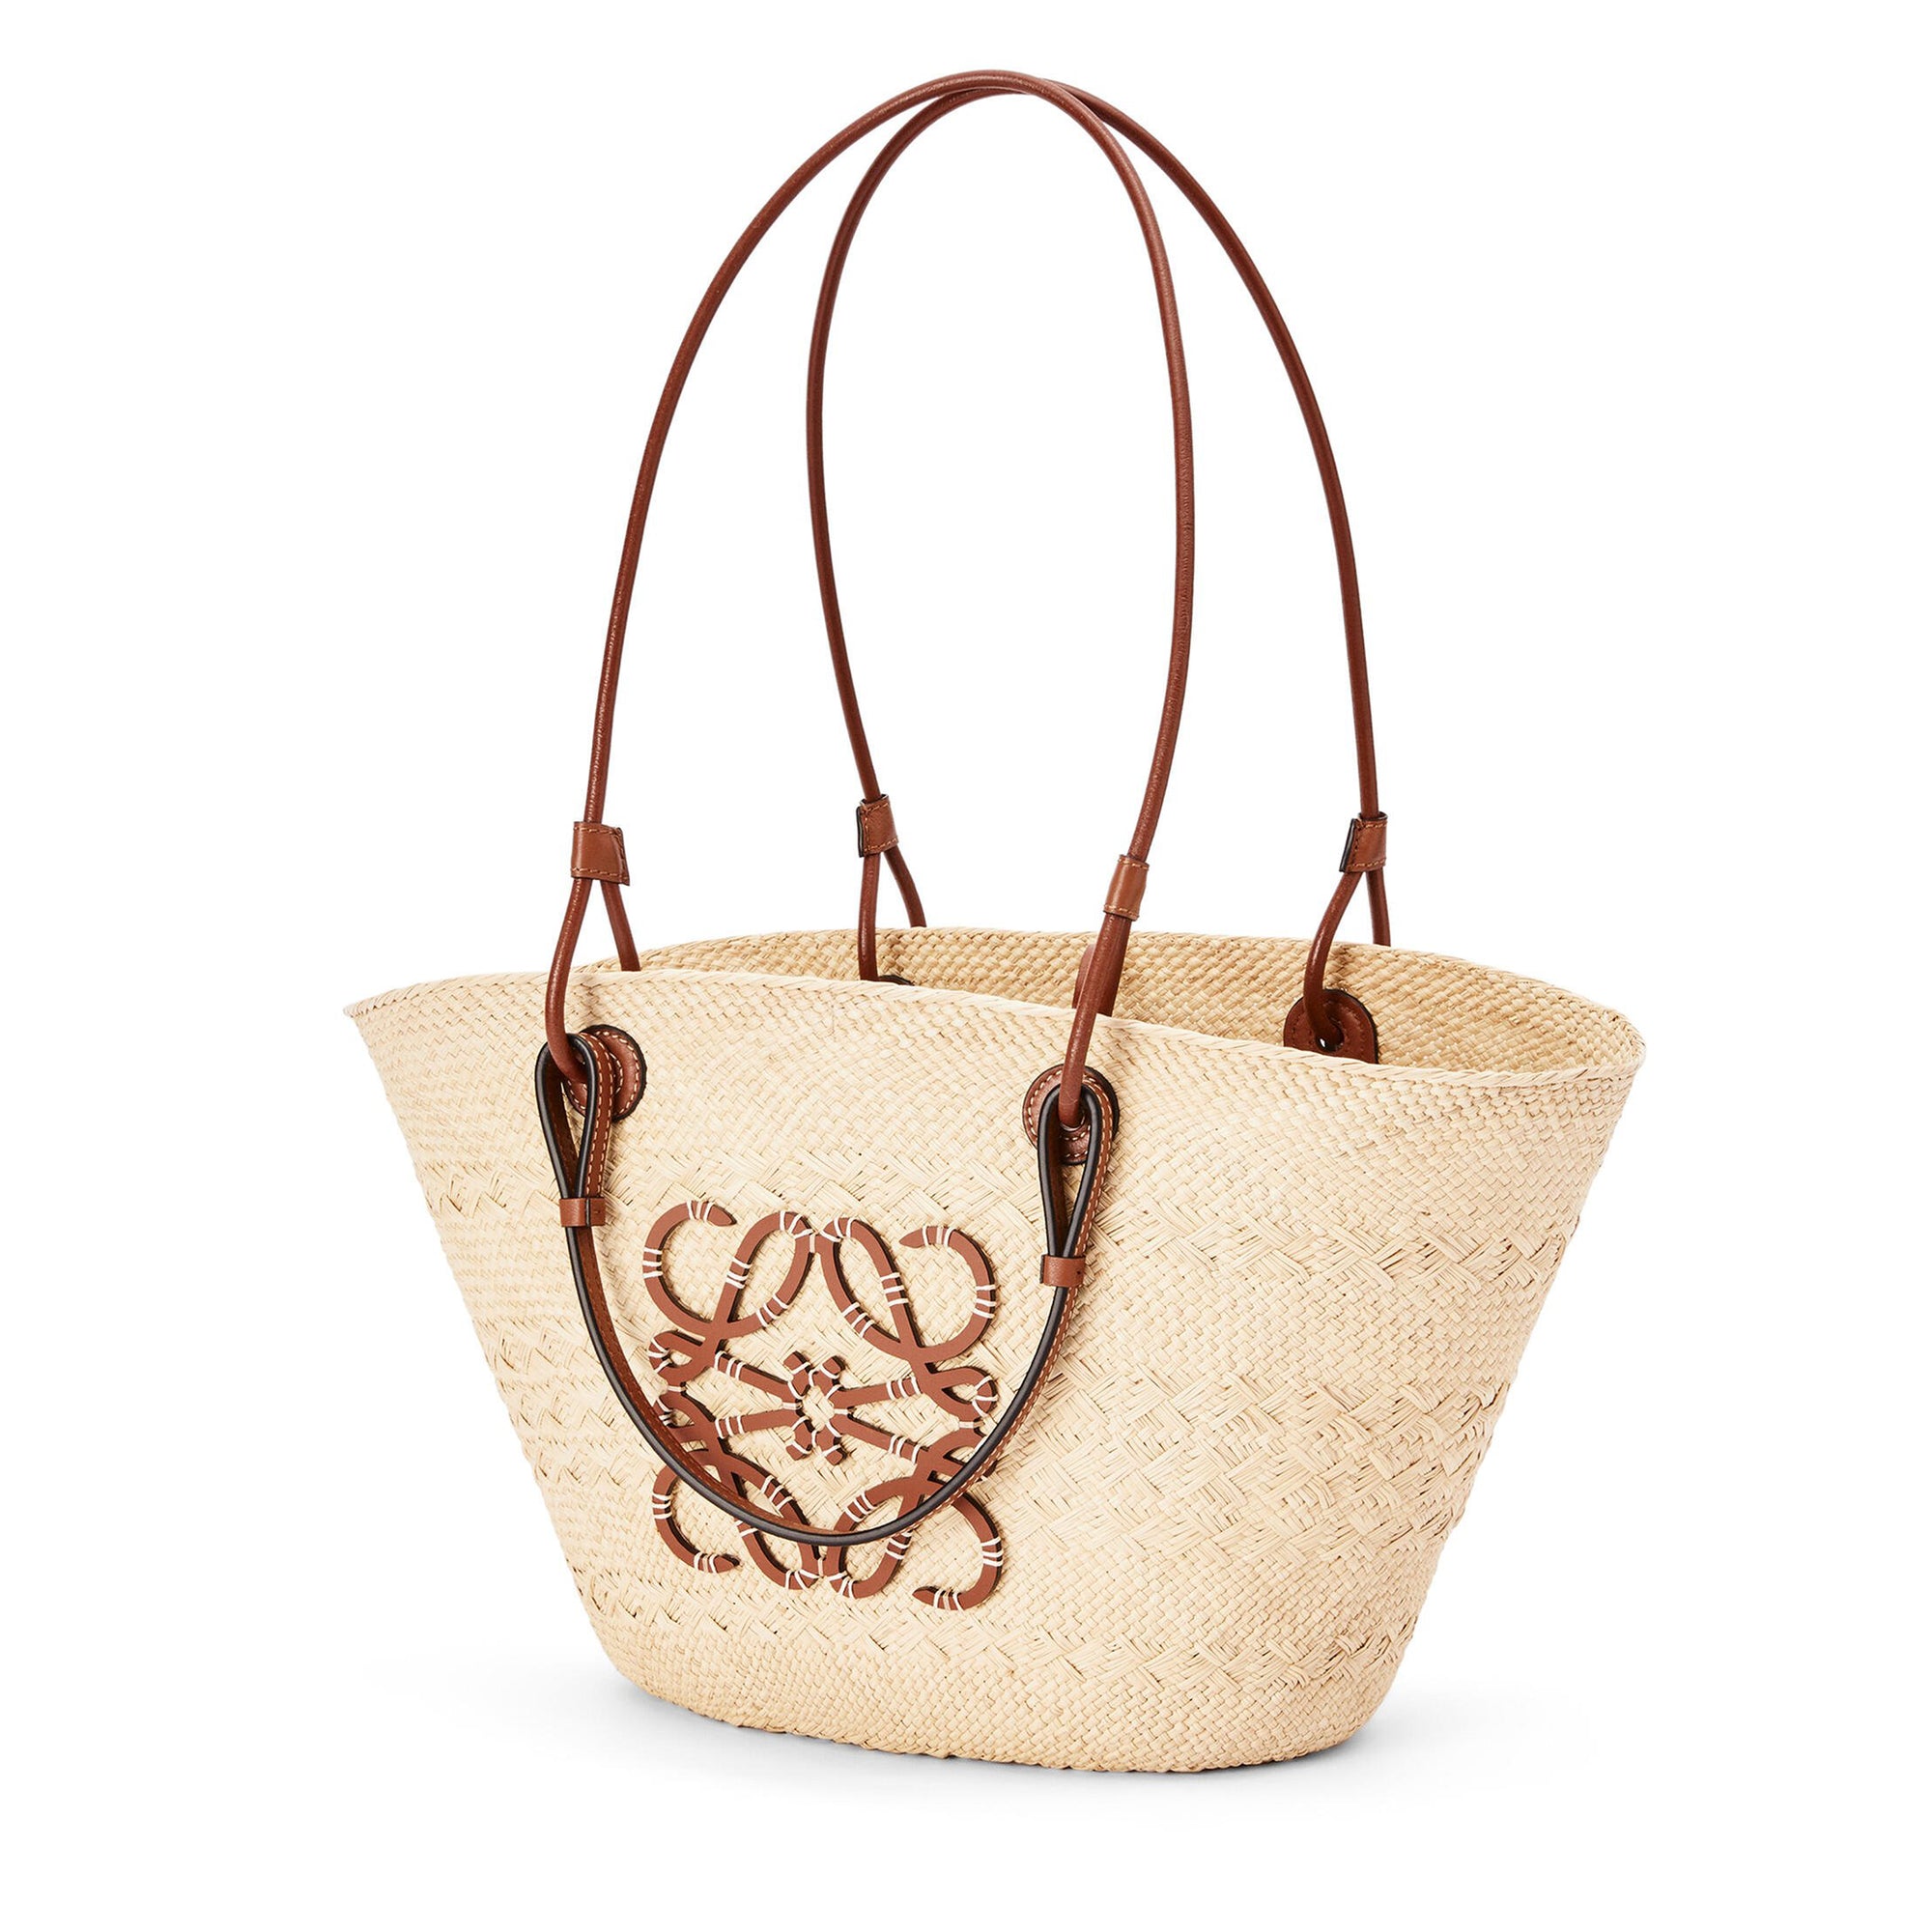 Comparing and Styling the Loewe Classic and Anagram Basket Bags